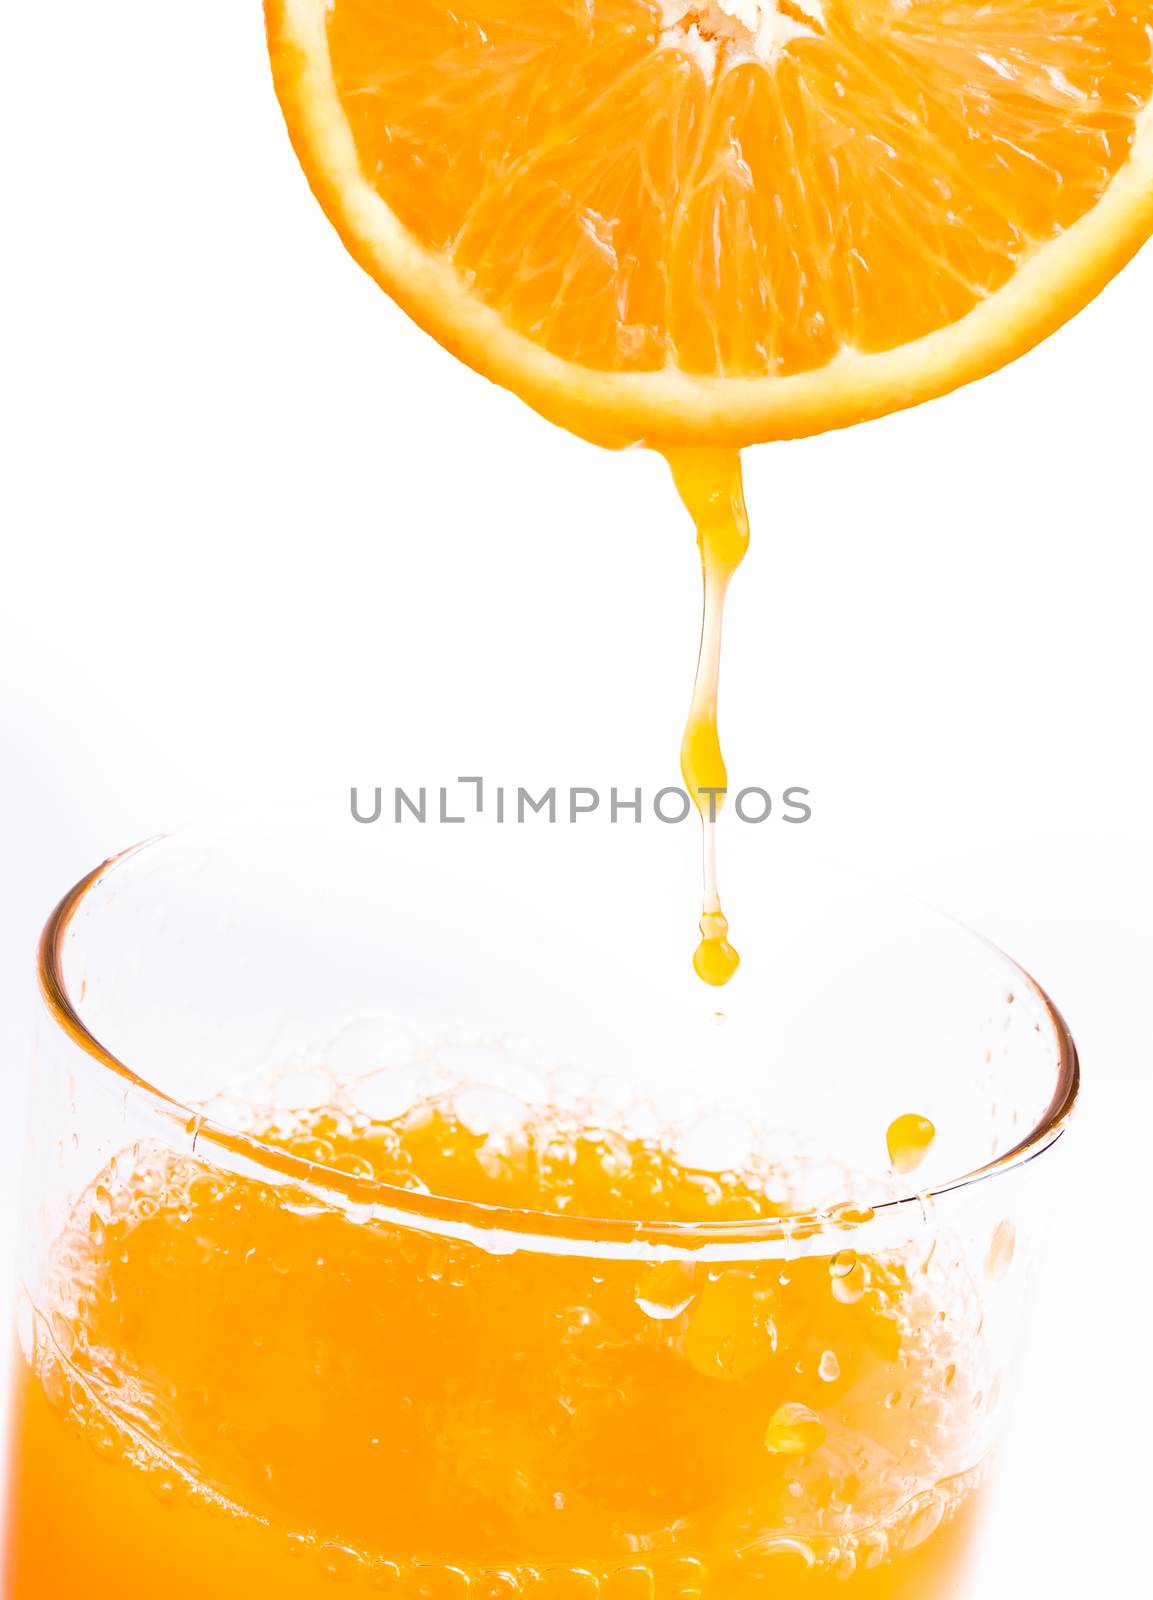 Healthy Orange Drink Indicates Fruits Liquid And Juice by stuartmiles